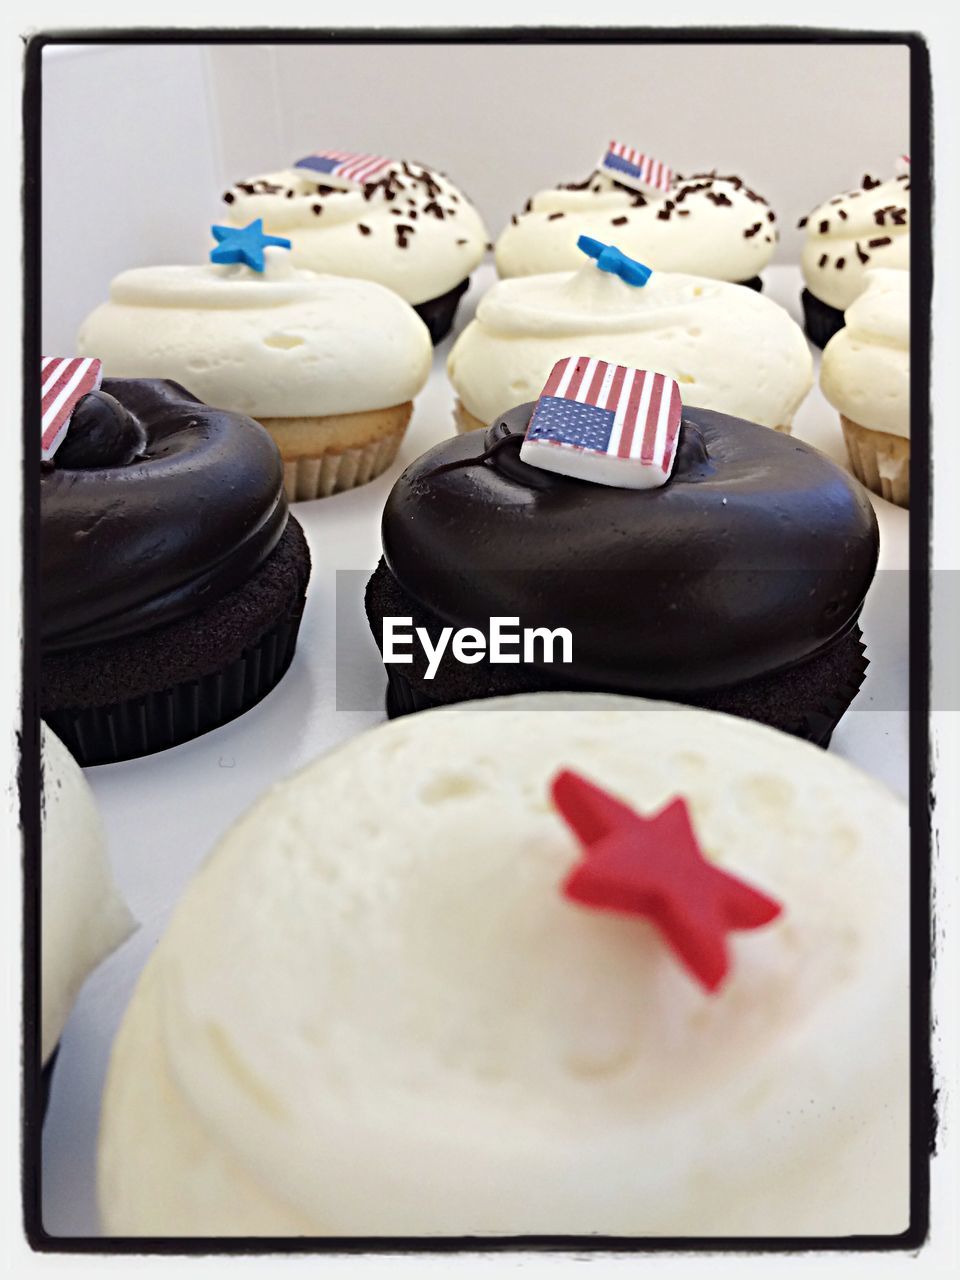 Cupcakes topped with us flags